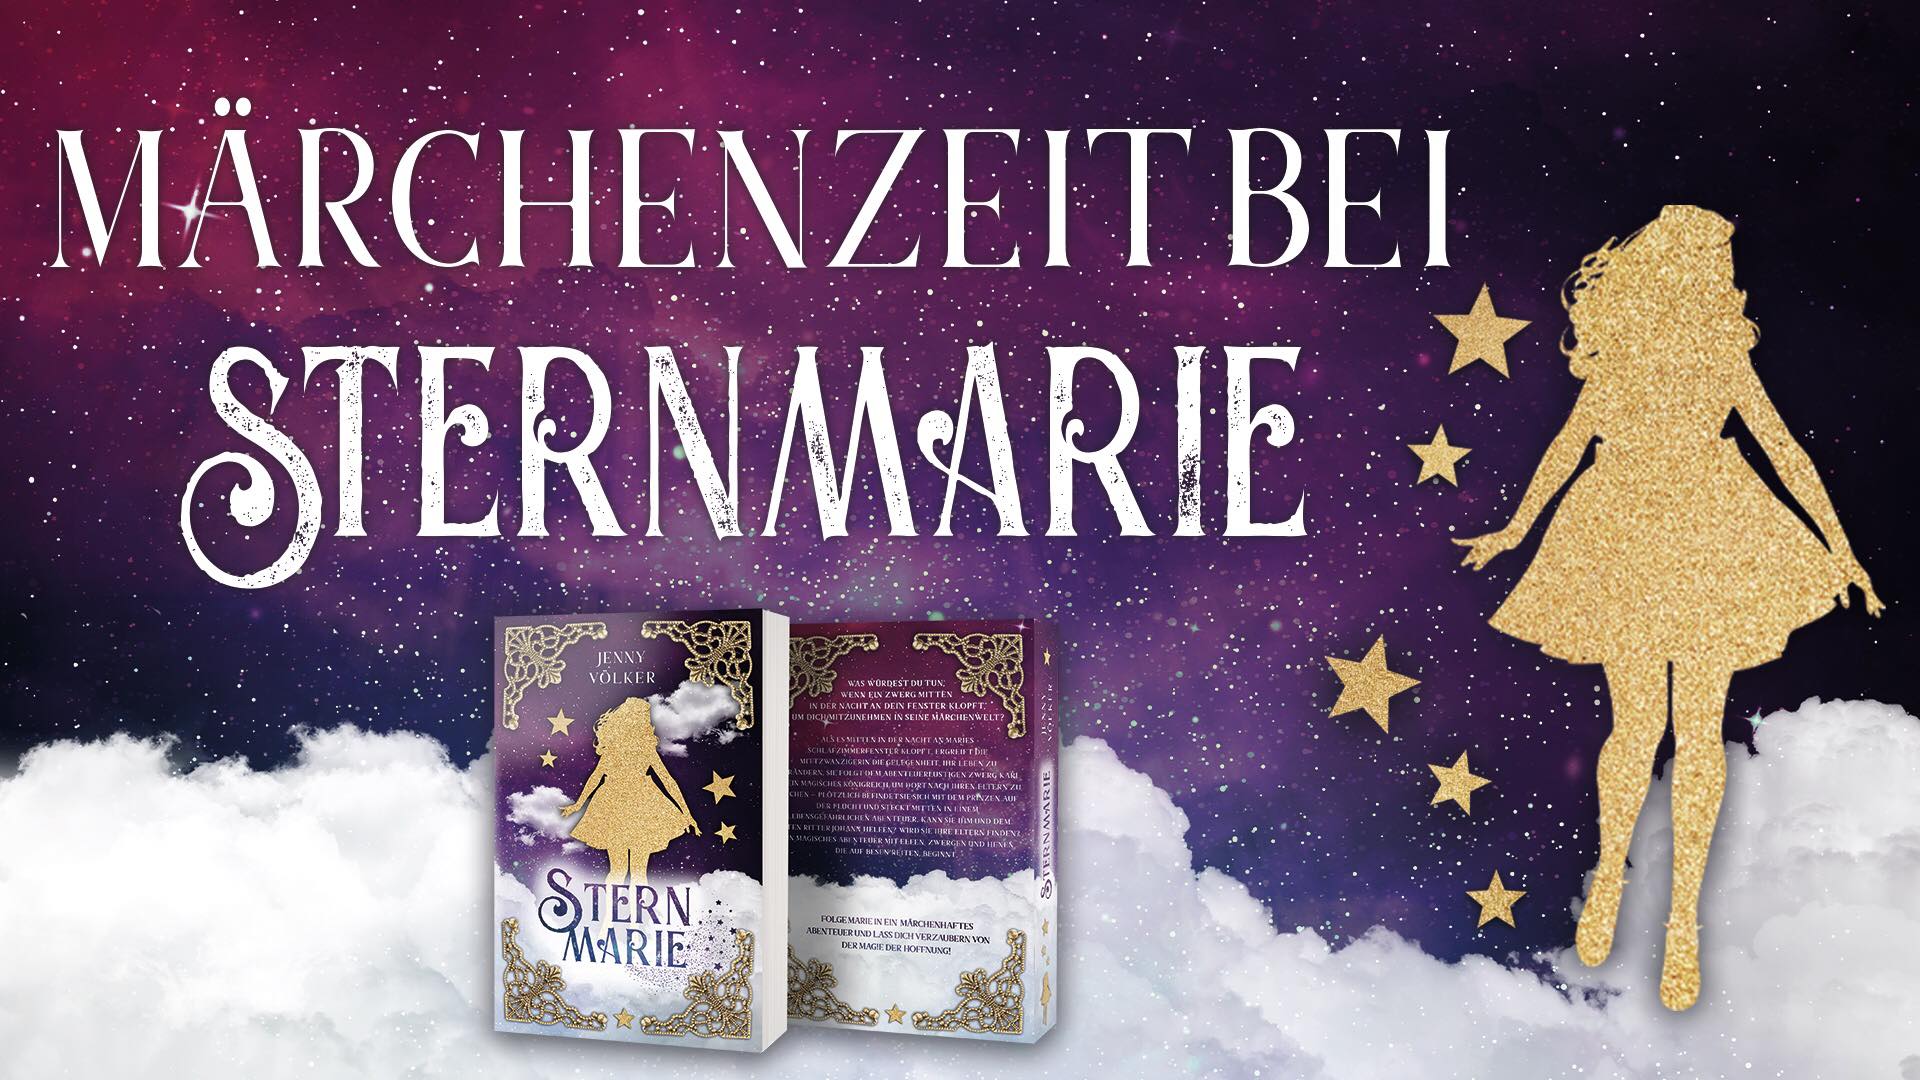 You are currently viewing Märchenzeit bei „Sternmarie“ 03